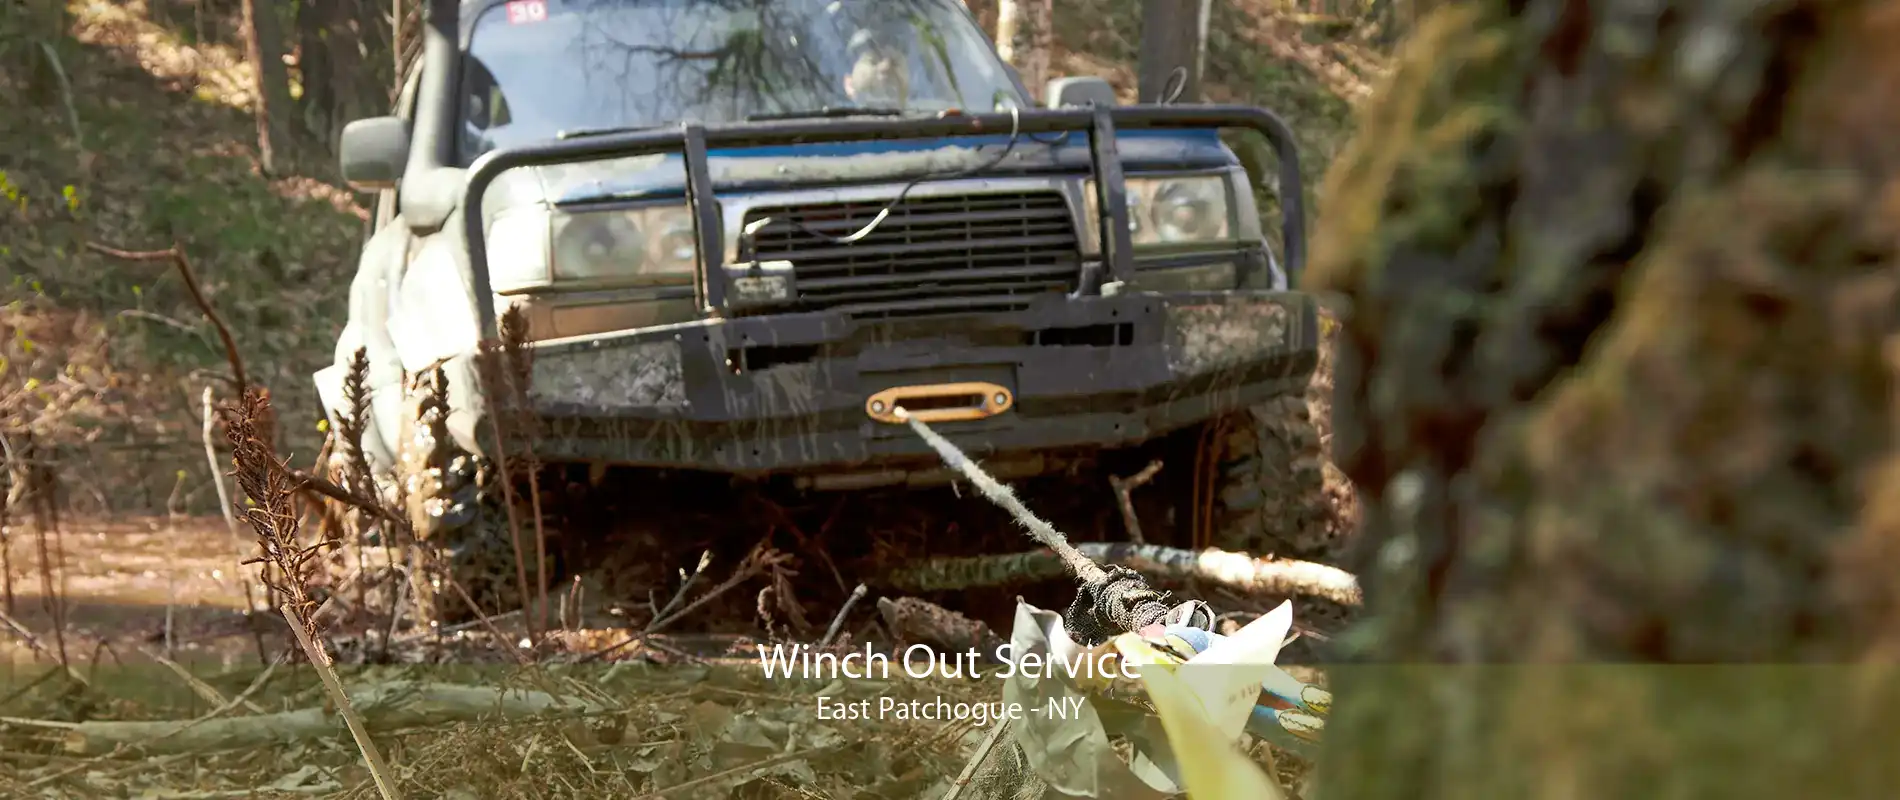 Winch Out Service East Patchogue - NY